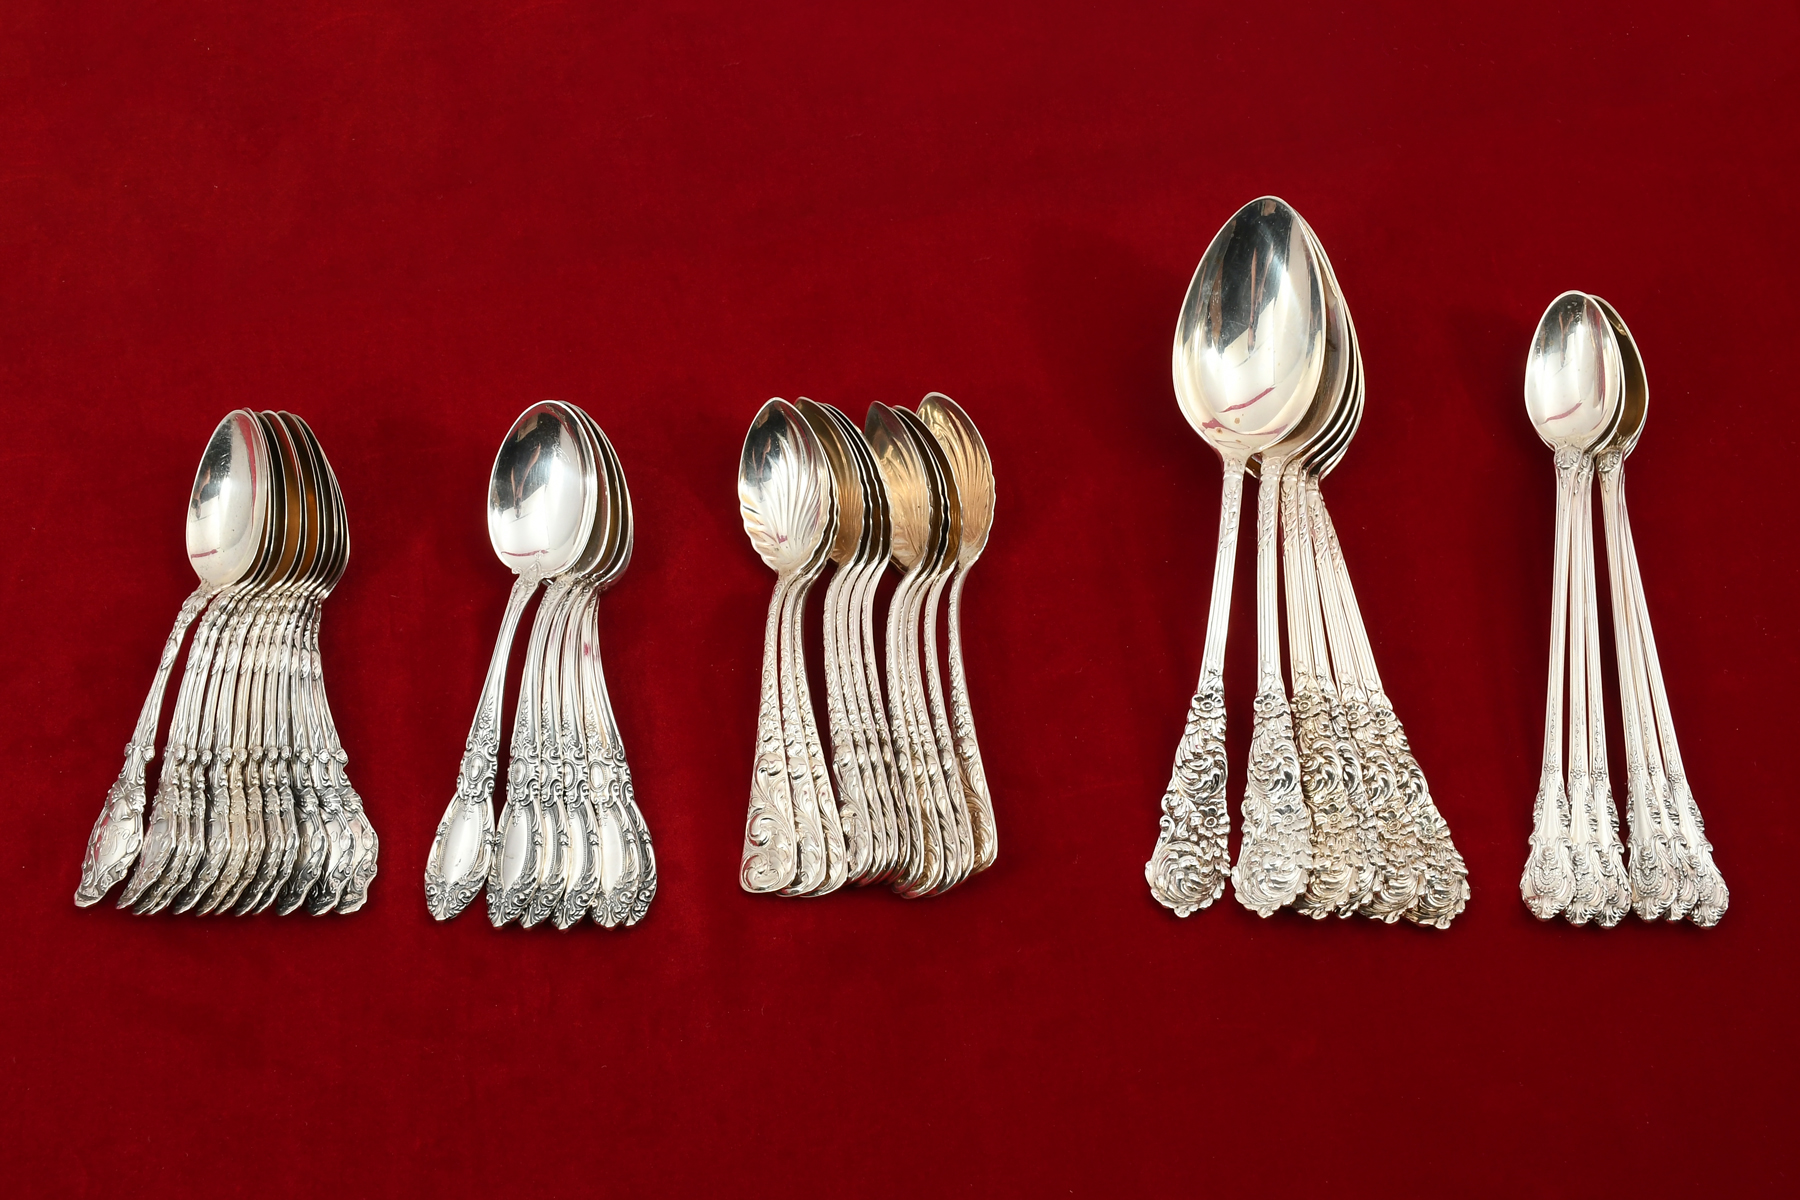 5 SETS OF ORNATE STERLING SPOONS  2ed2d9